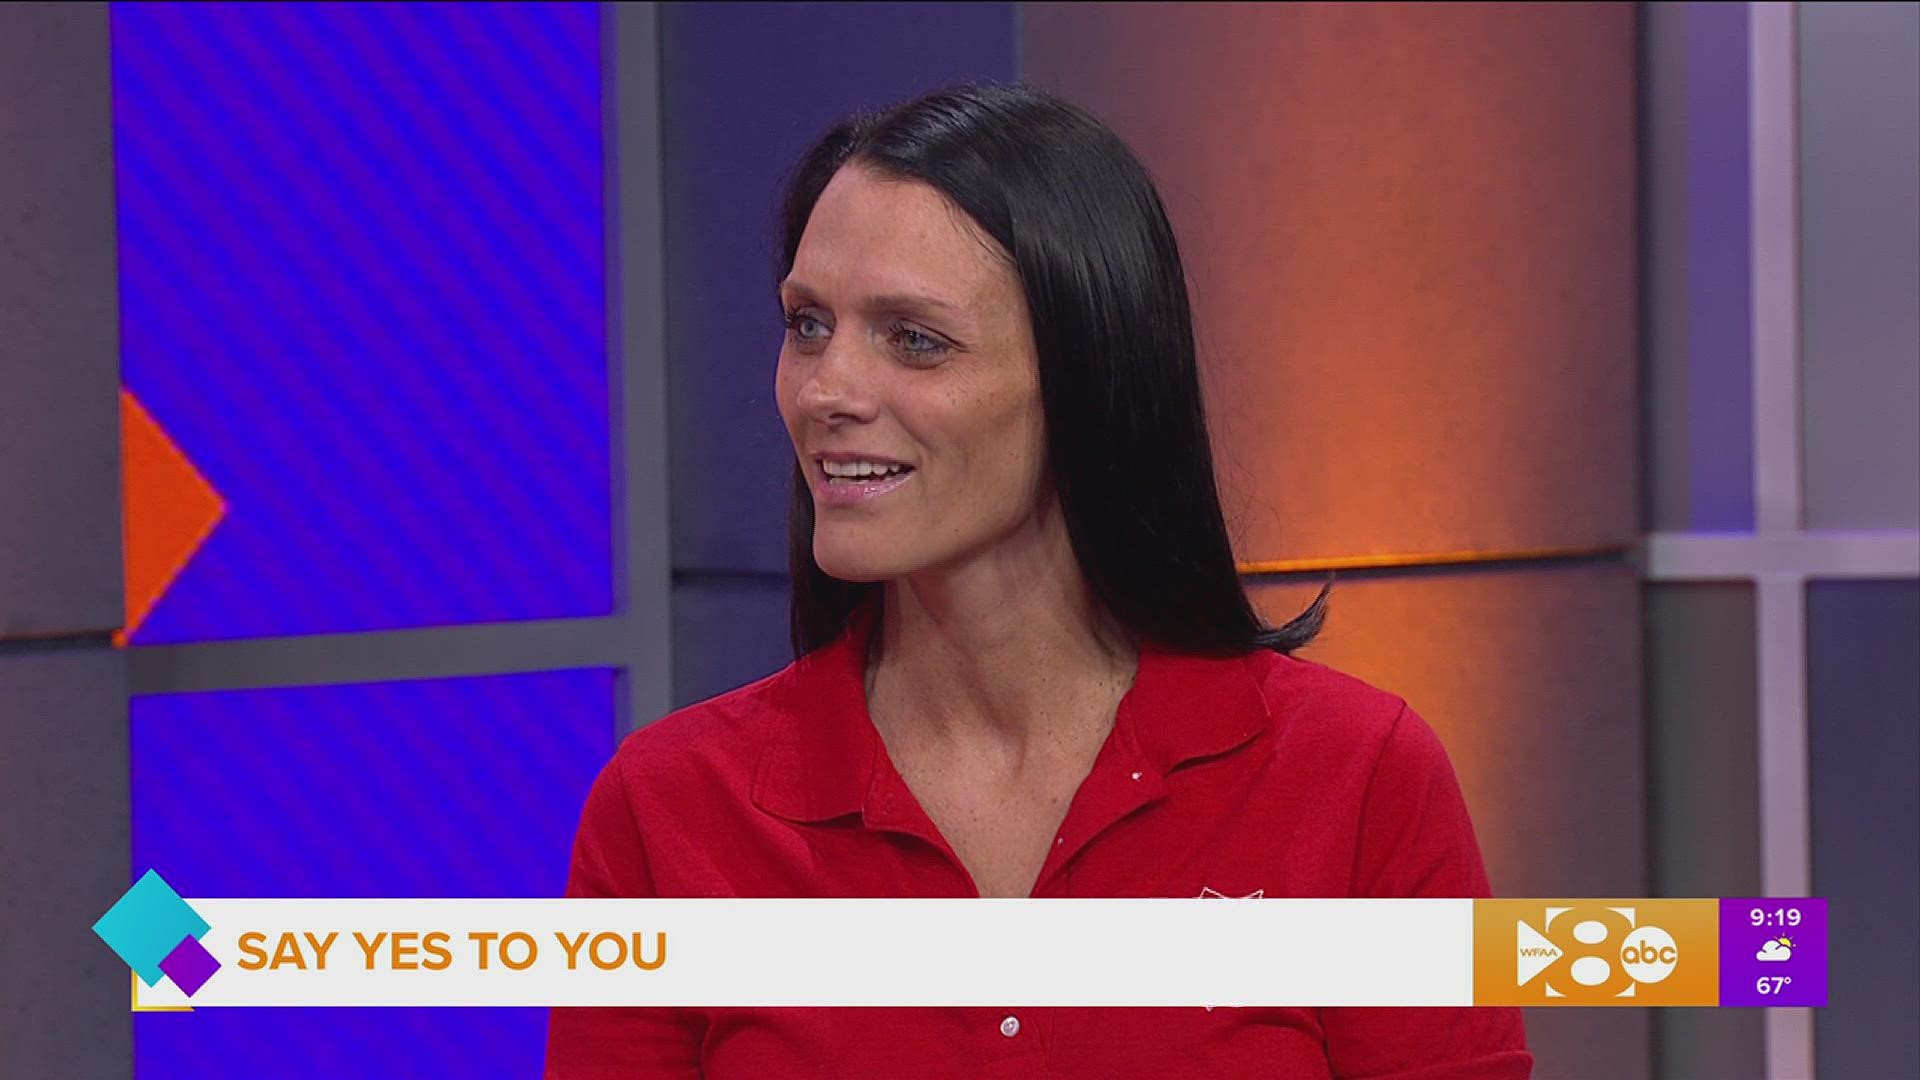 Tammy Finney talks about how not loving herself led her to seek help from the Salvation Army.  She is now part of their team joining their mission to help others.